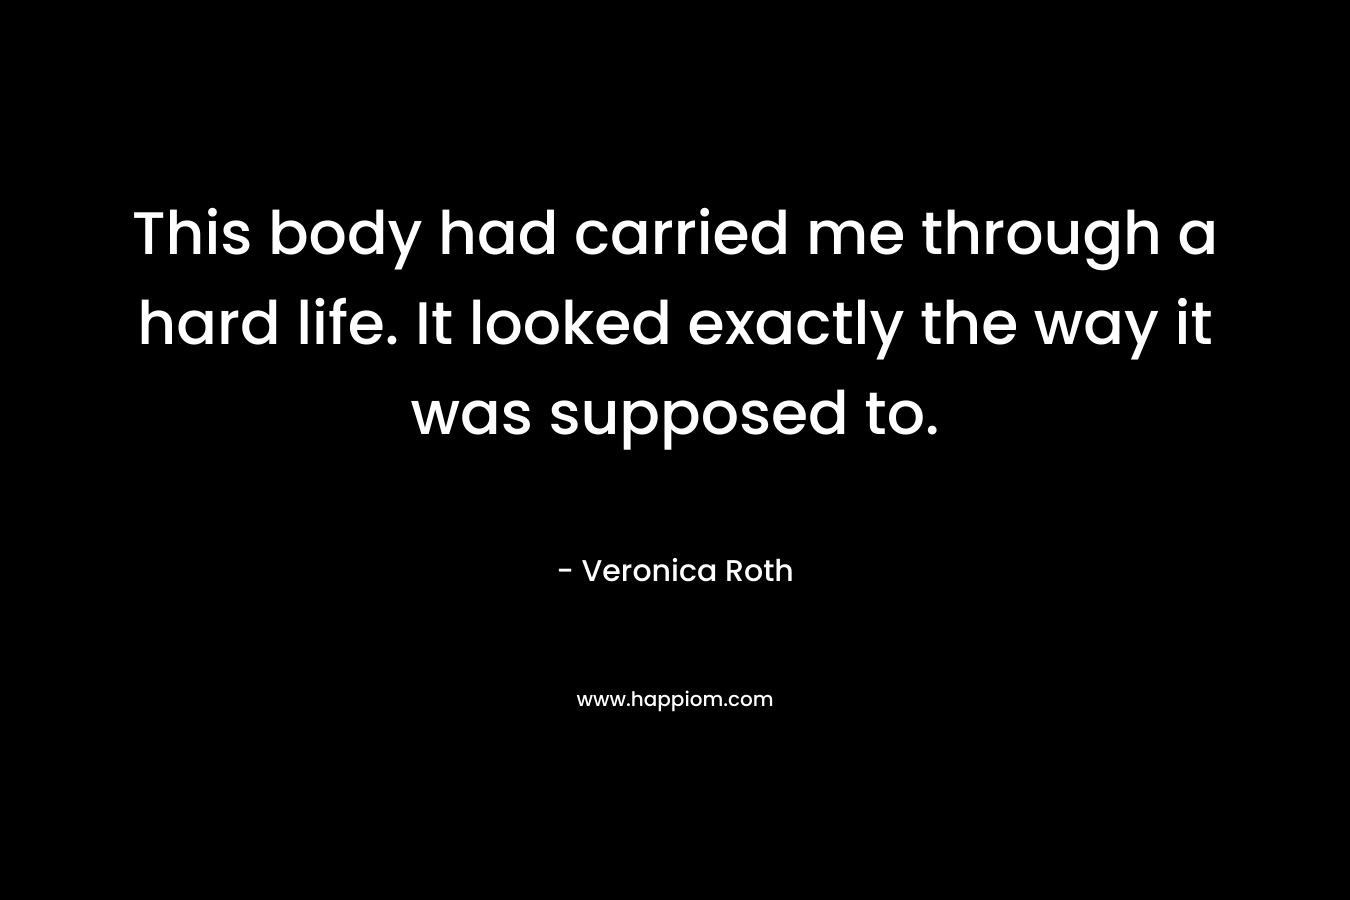 This body had carried me through a hard life. It looked exactly the way it was supposed to. – Veronica Roth